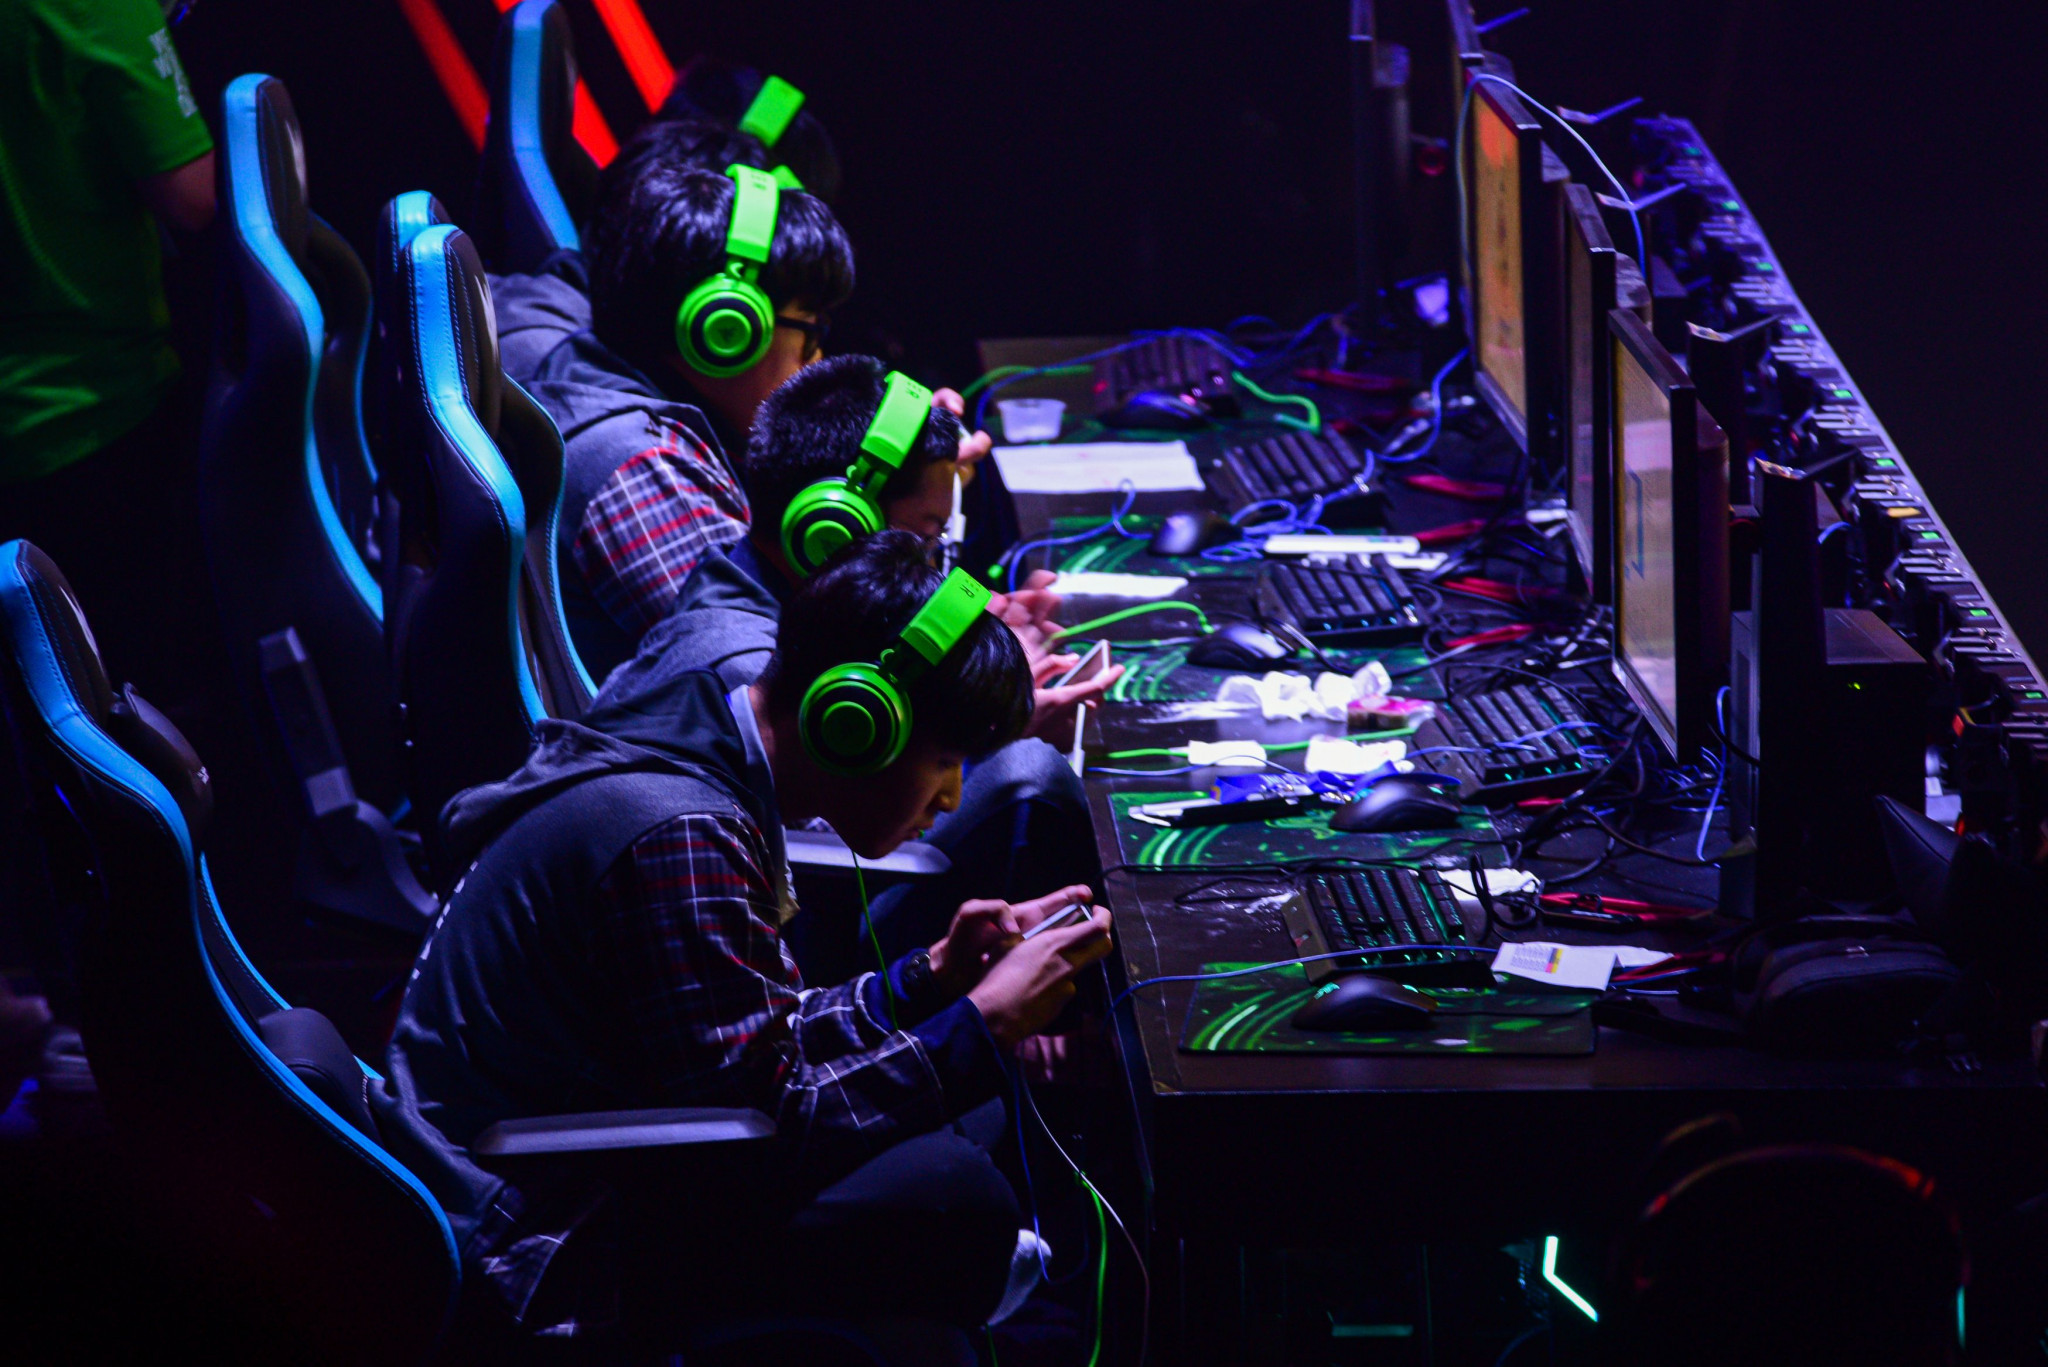 The Qatar Esports Federation has partnered with Quest ©Getty Images